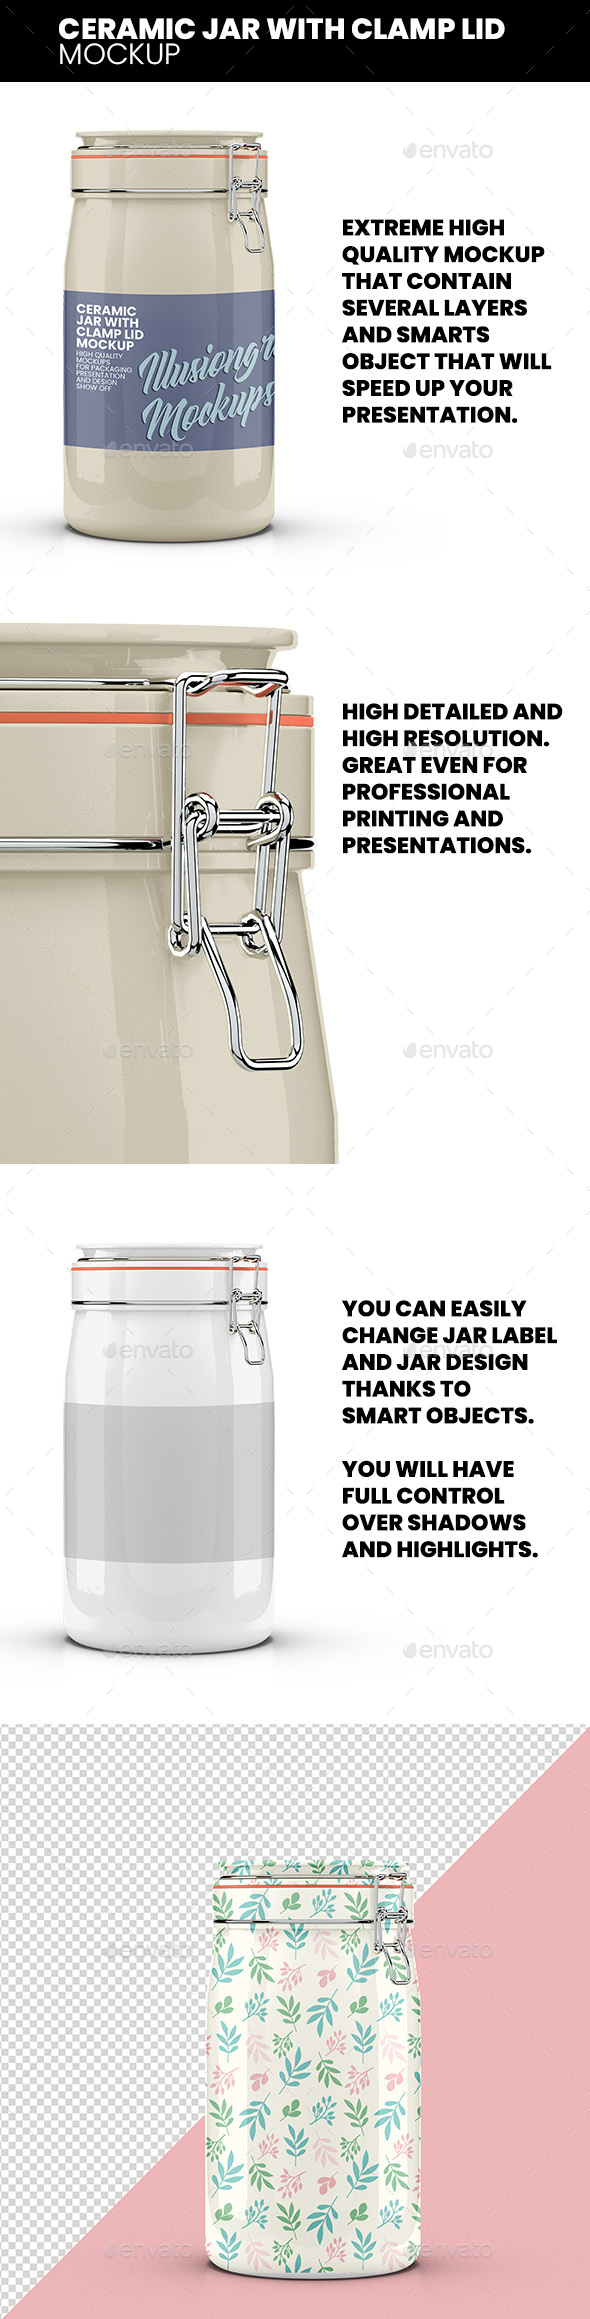 Download Ceramic Jar With Clamp Lid Mockup By Illusiongraphic Graphicriver